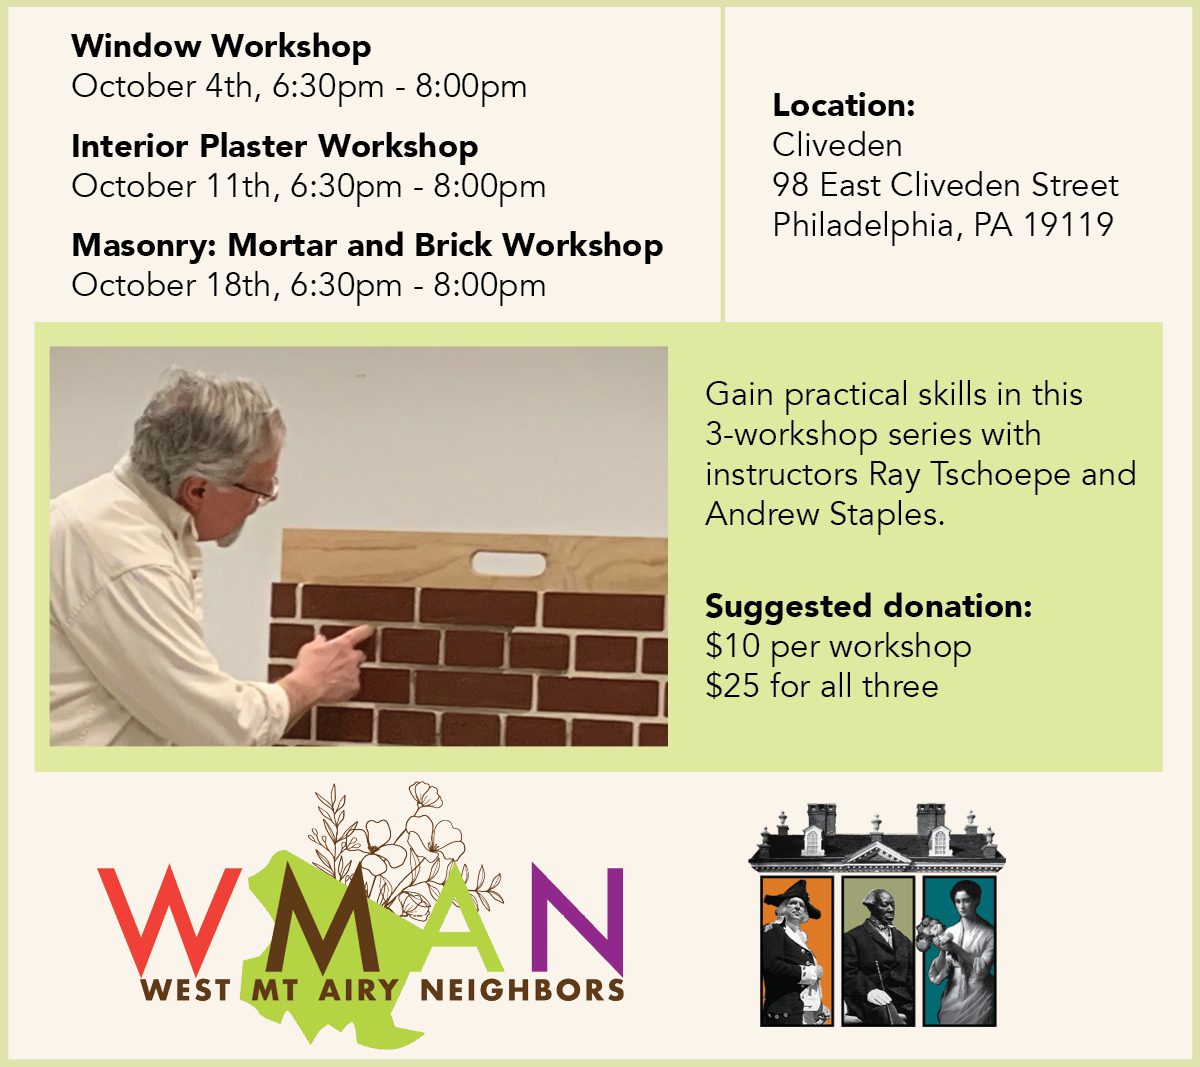 Describes a workshop series for maintenance and repair of materials in old houses. Workshops topics include windows, interior plaster, and masonry. A photograph shows a man pointing at the mortar in between bricks.